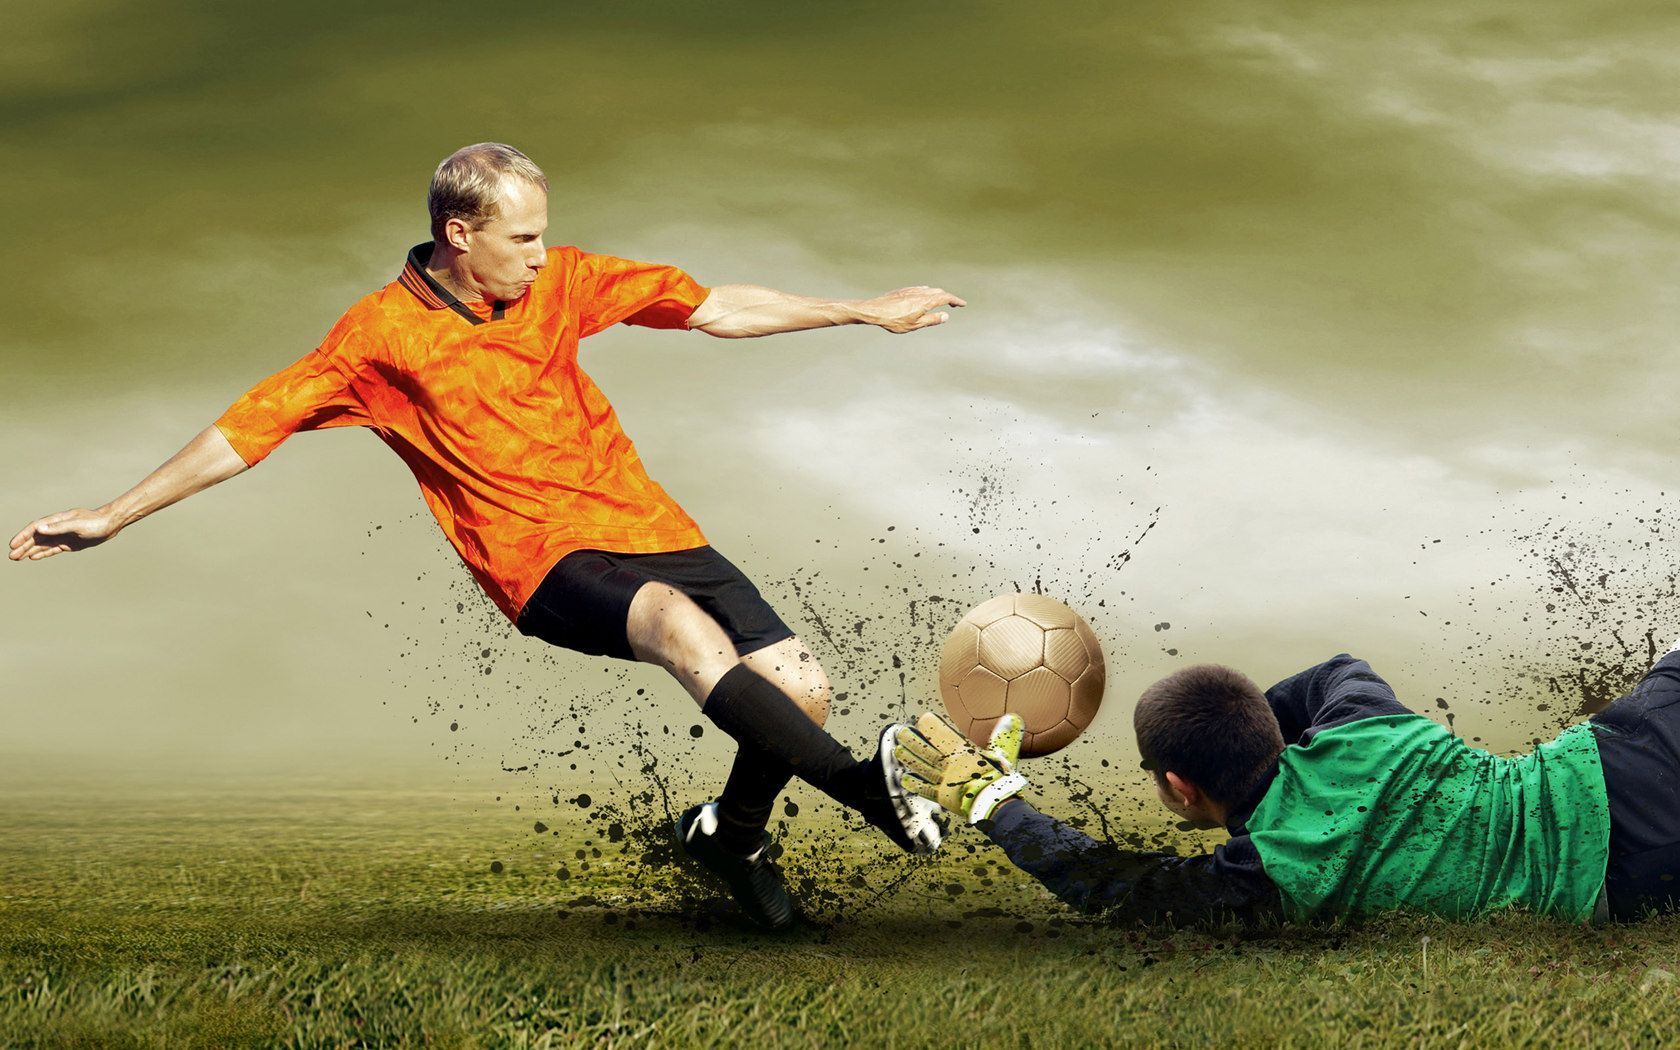 Soccer Wallpapers Archives - Football HD Backgrounds